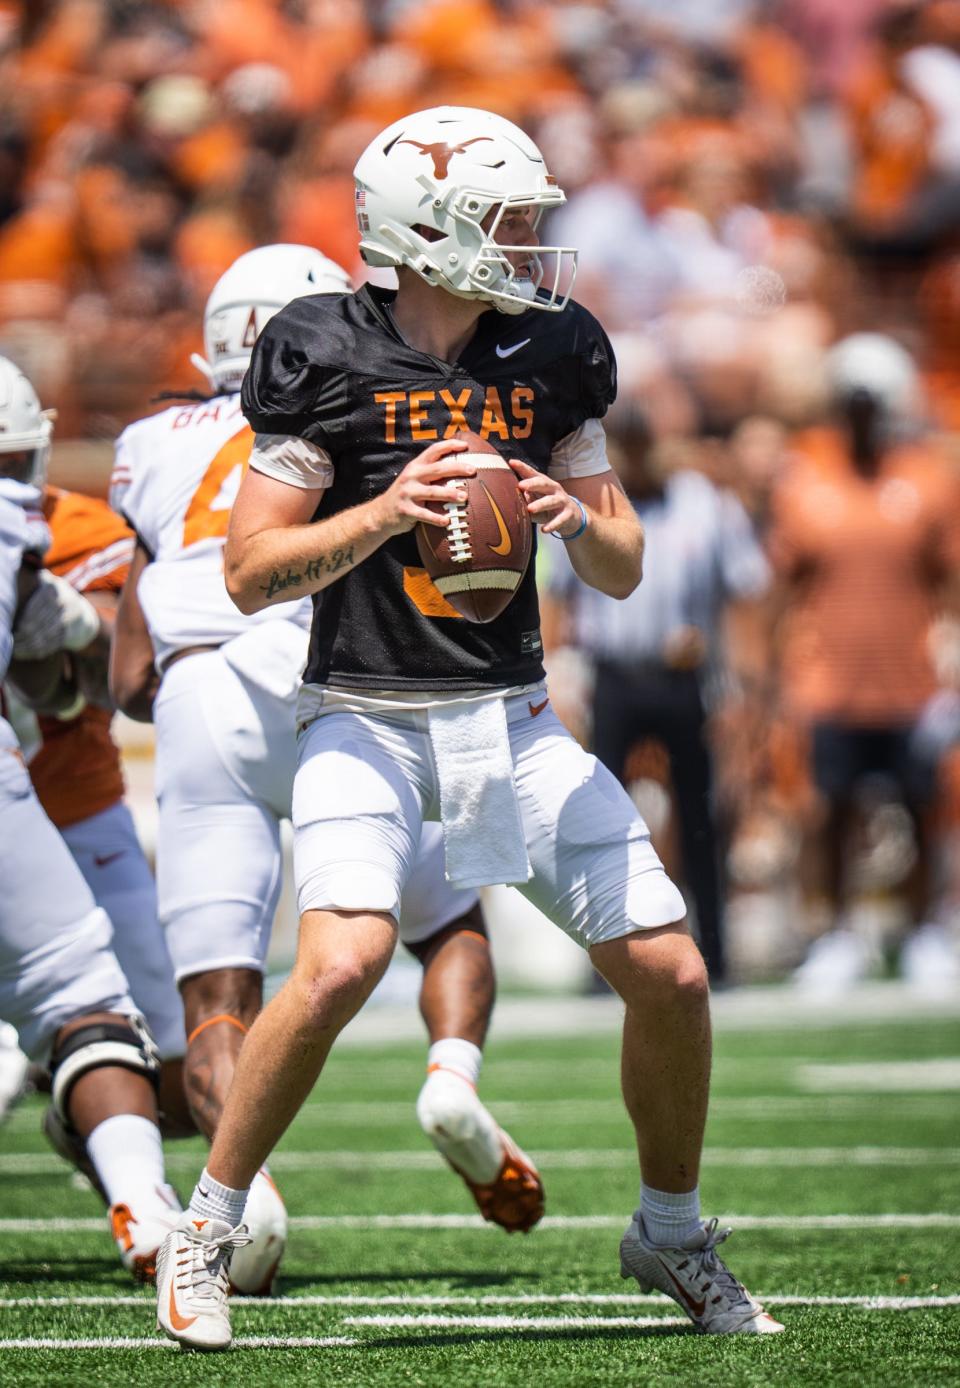 Quarterback Quinn Ewers looked sharp Saturday, and coach Steve Sarkisian reiterated after the scrimmage that Ewers is the Longhorns' starter. Prized freshman Arch Manning and redshirt freshman Maalik Murphy also played.